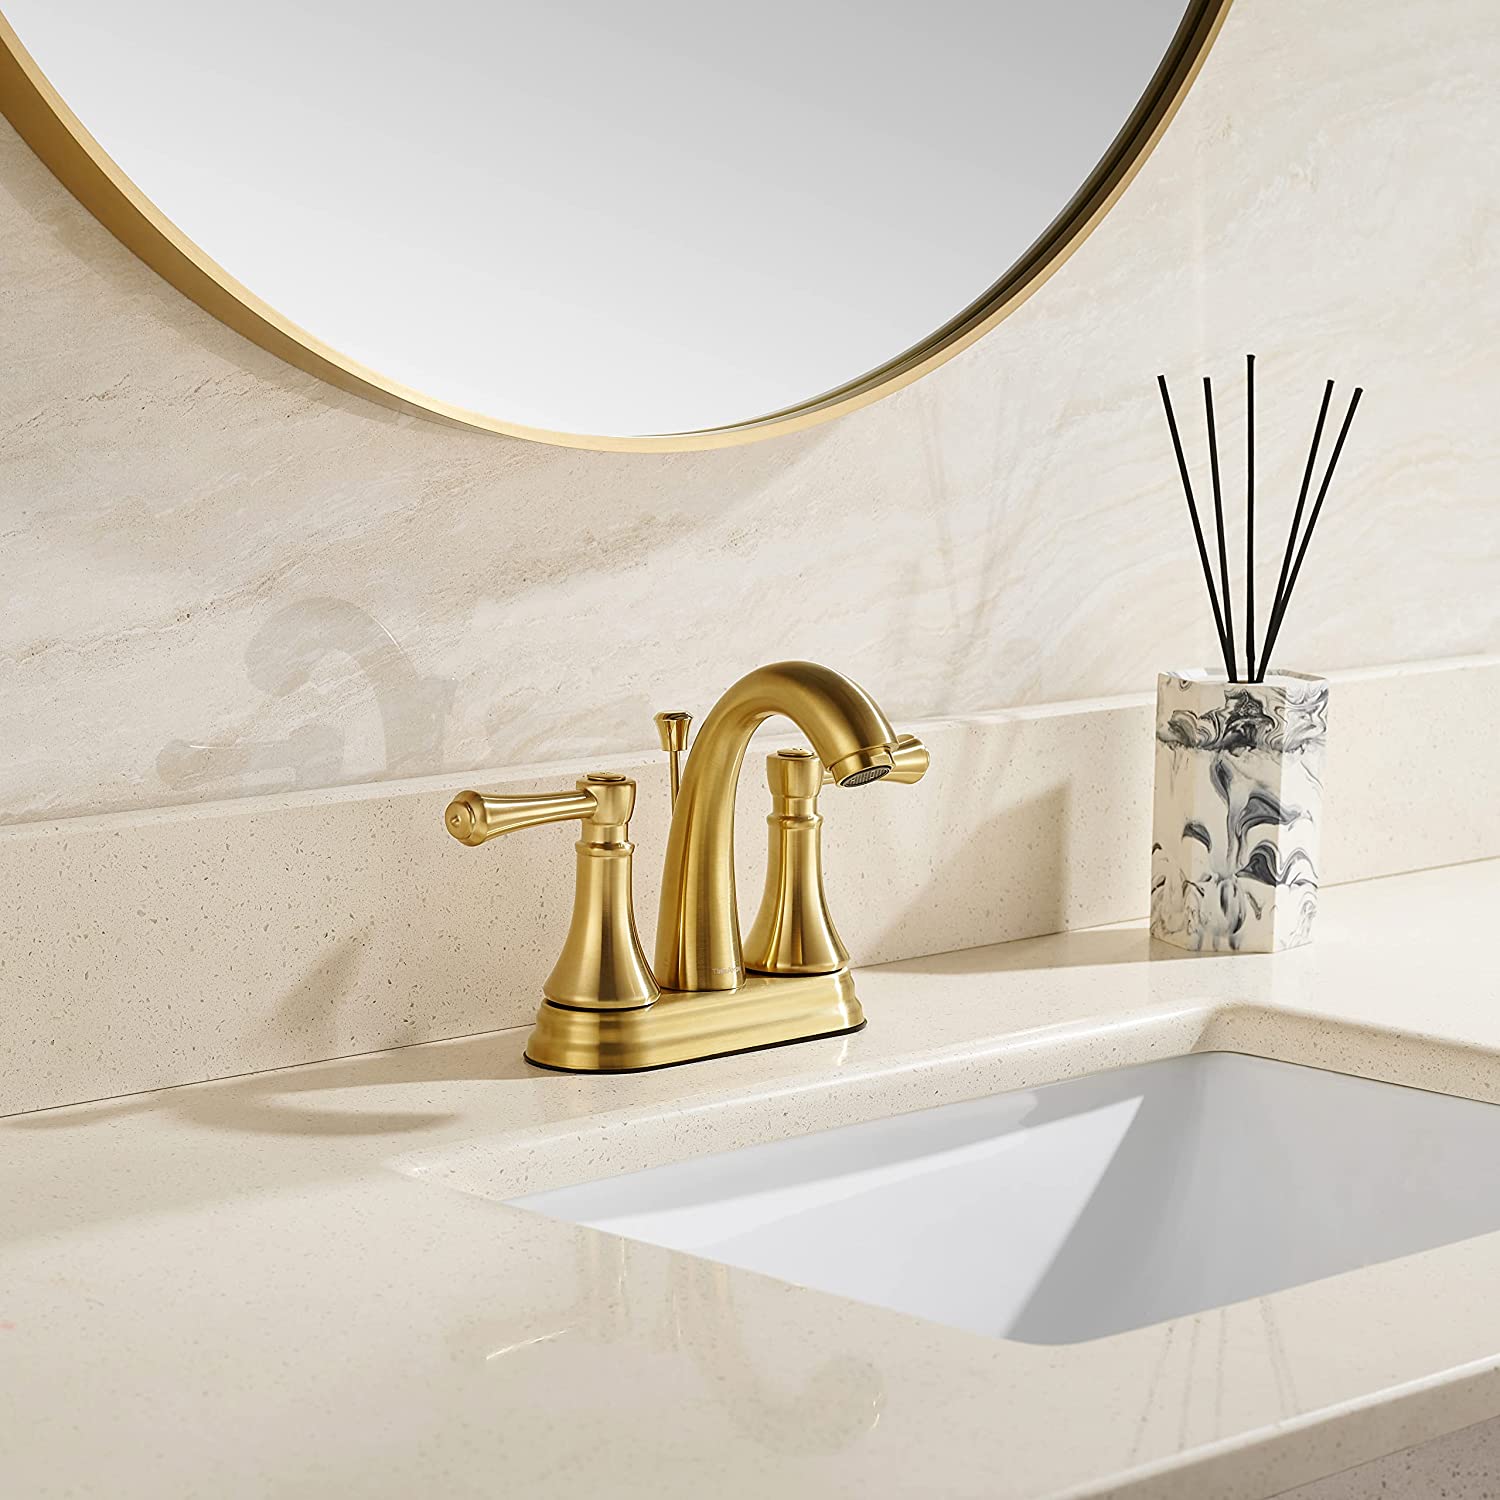 4 Inch Brushed Gold Bathroom Faucet with Lift Rod Drain